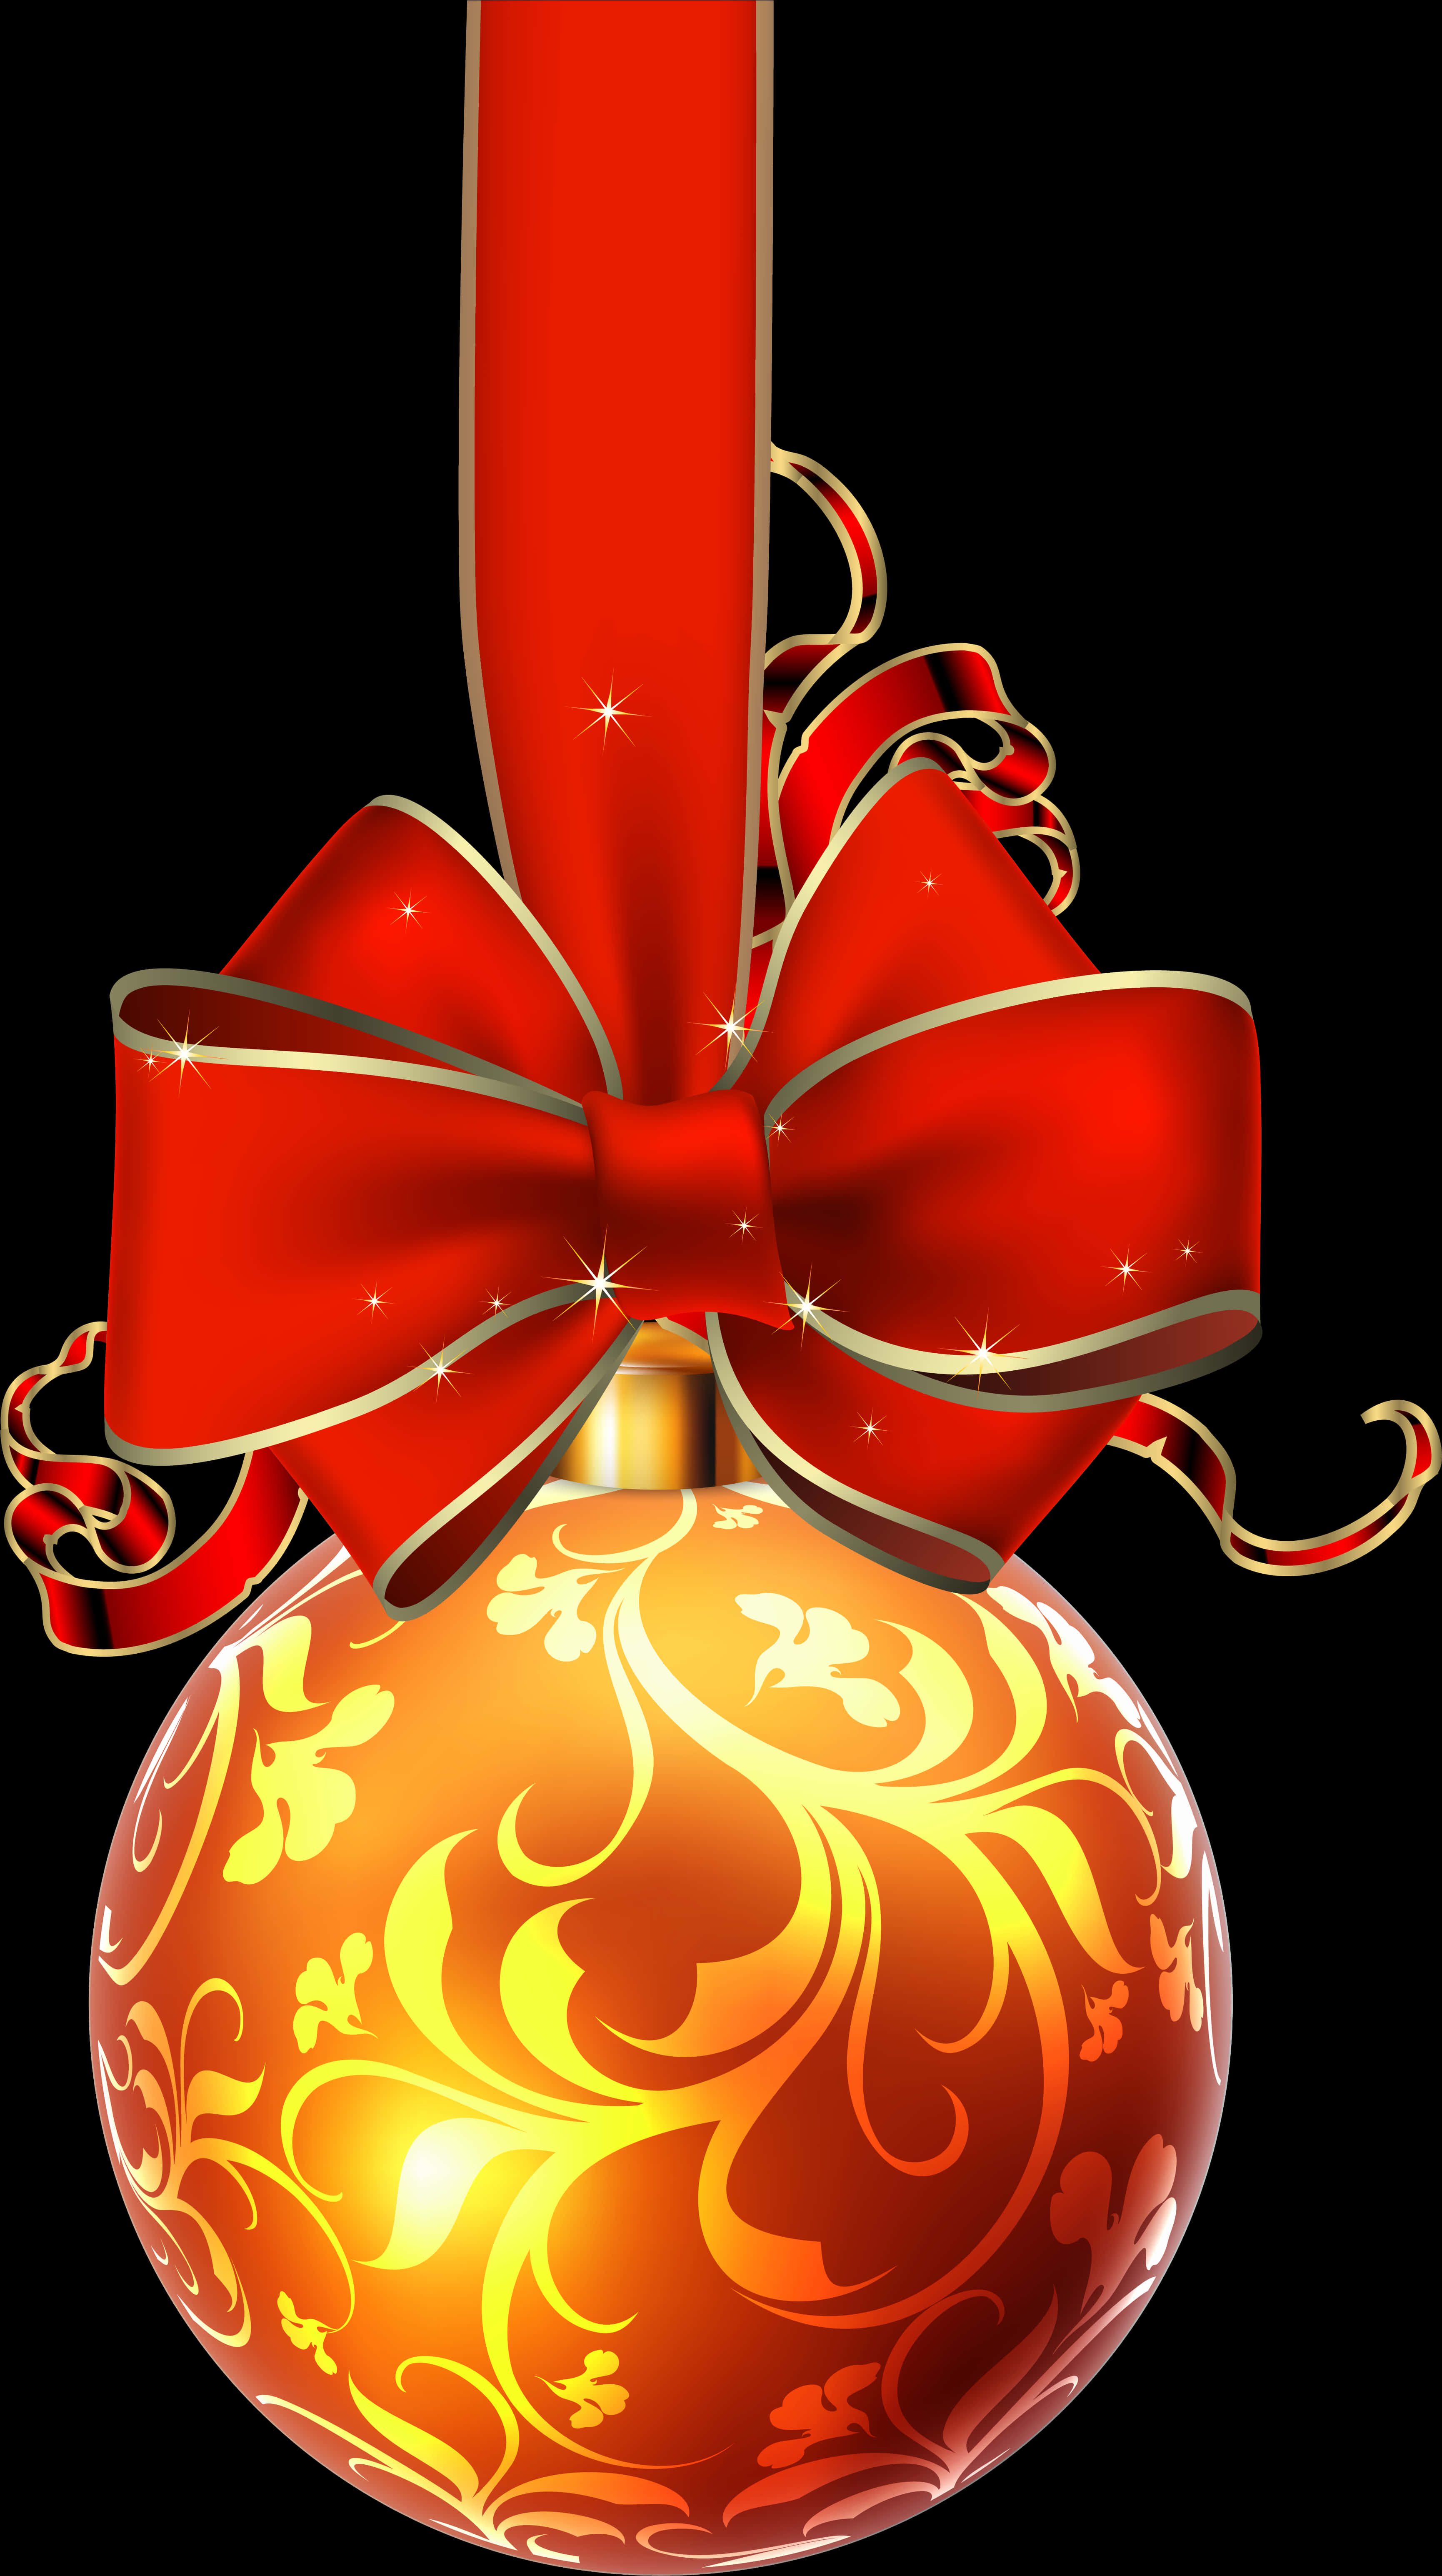 Festive Red Ribbonand Ornament PNG image